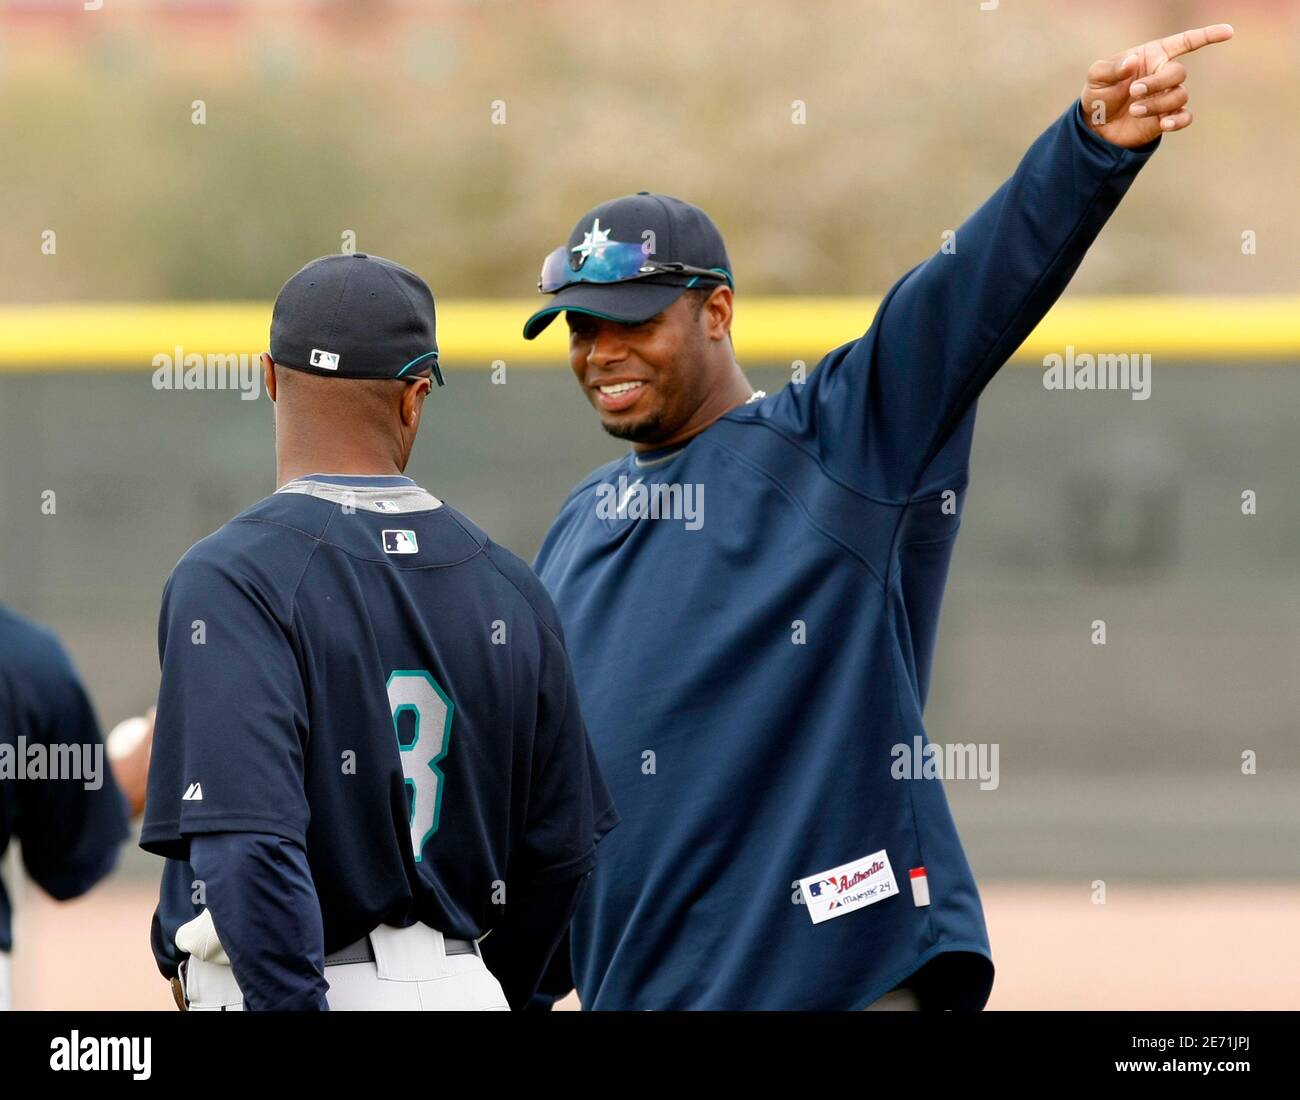 Seattle Mariners Ken Griffey Jr. (R) talks with Lee Tinsley during their  MLB spring training baseball camp in Peoria, Arizona on February 22, 2009.  REUTERS/Rick Scuteri (UNITED STATES Stock Photo - Alamy